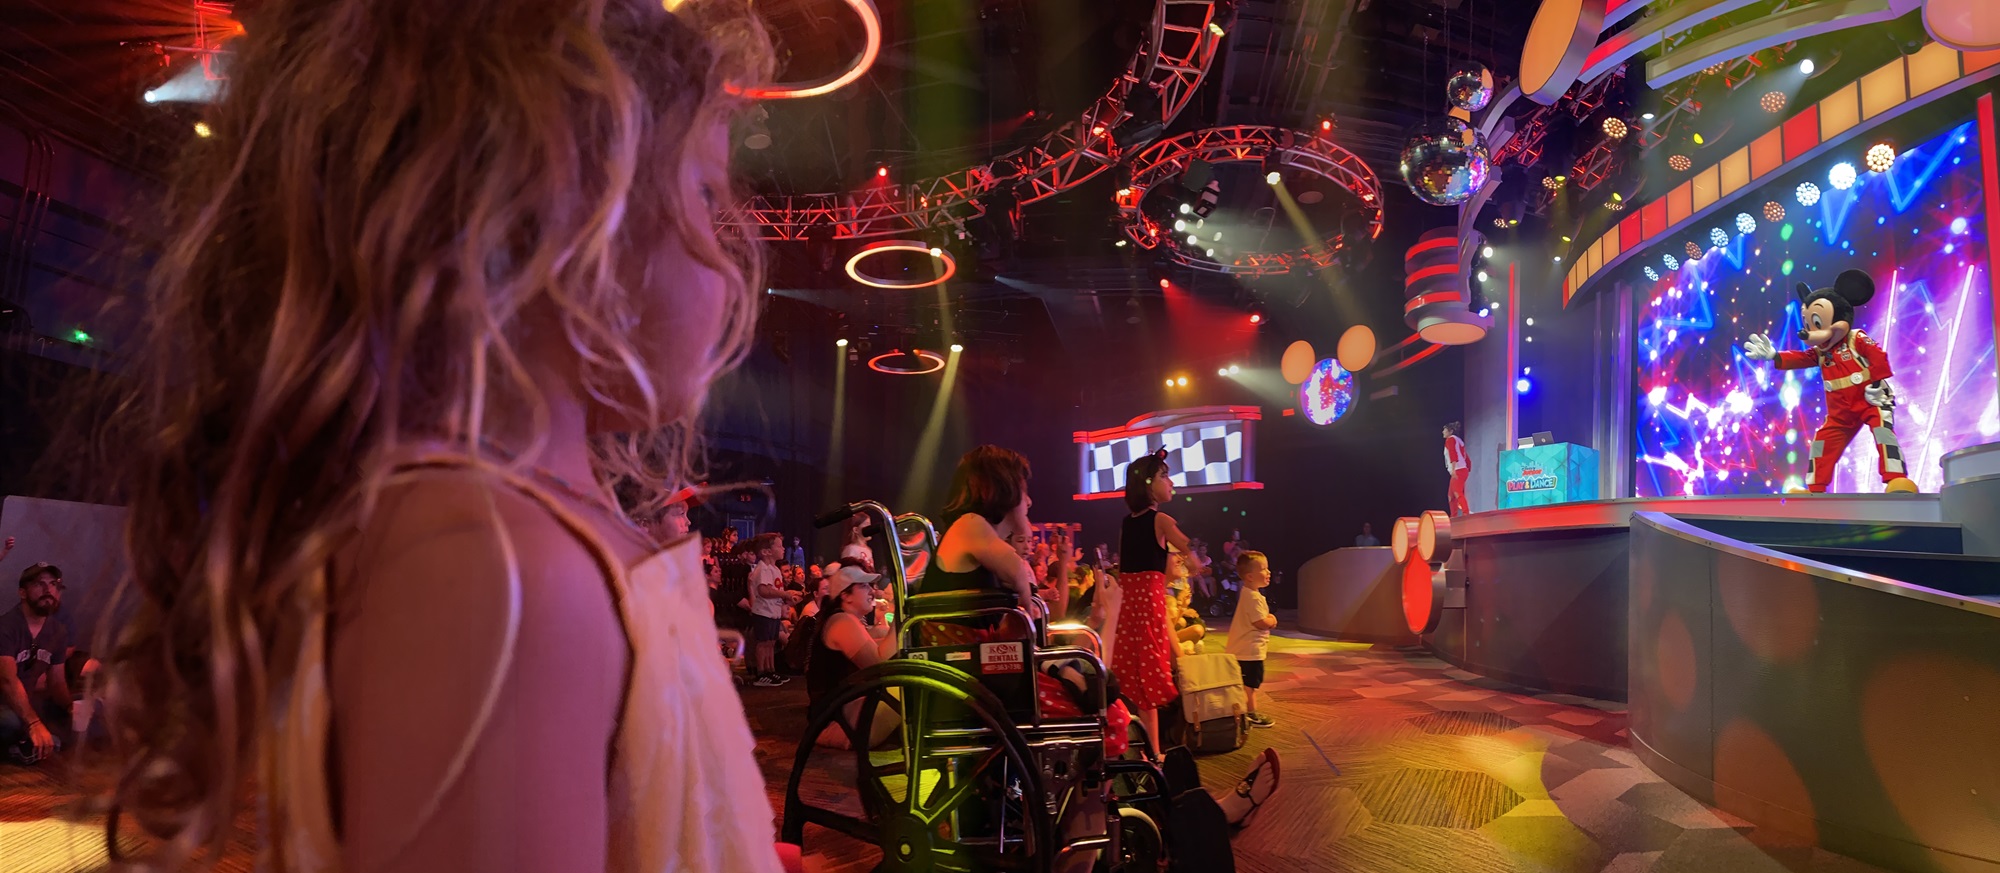 A child watching Mickey at the Disney Junior Dance Party - A perfect show for toddlers at Hollywood Studios in Disney World